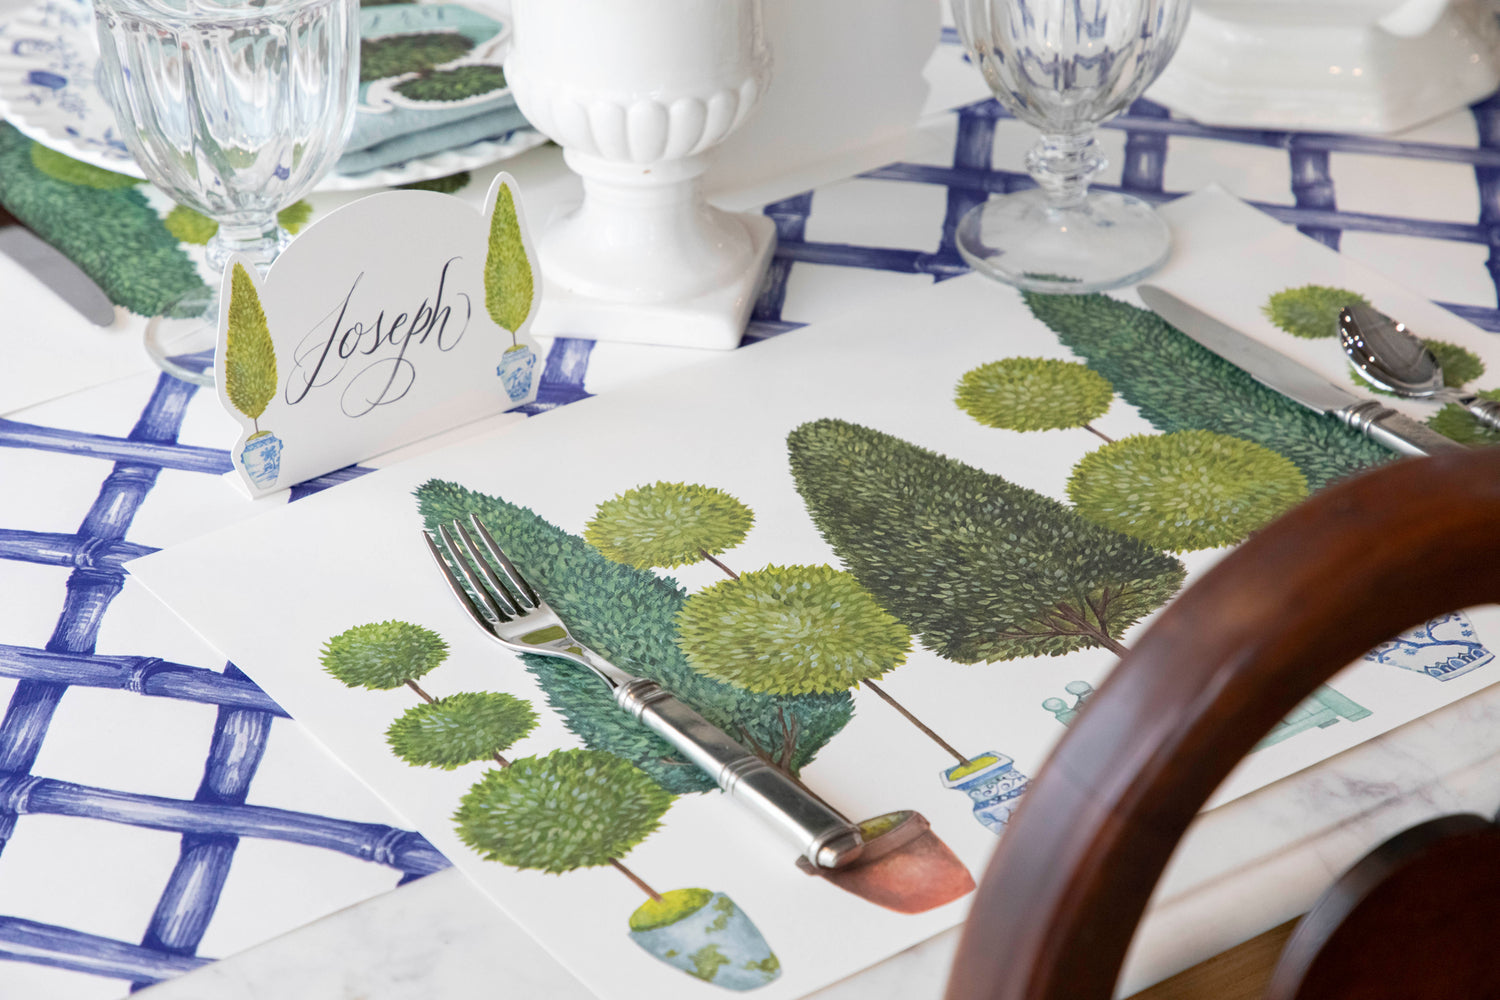 The Blue Lattice Runner under an elegant topiary-themed place setting, at an angle.